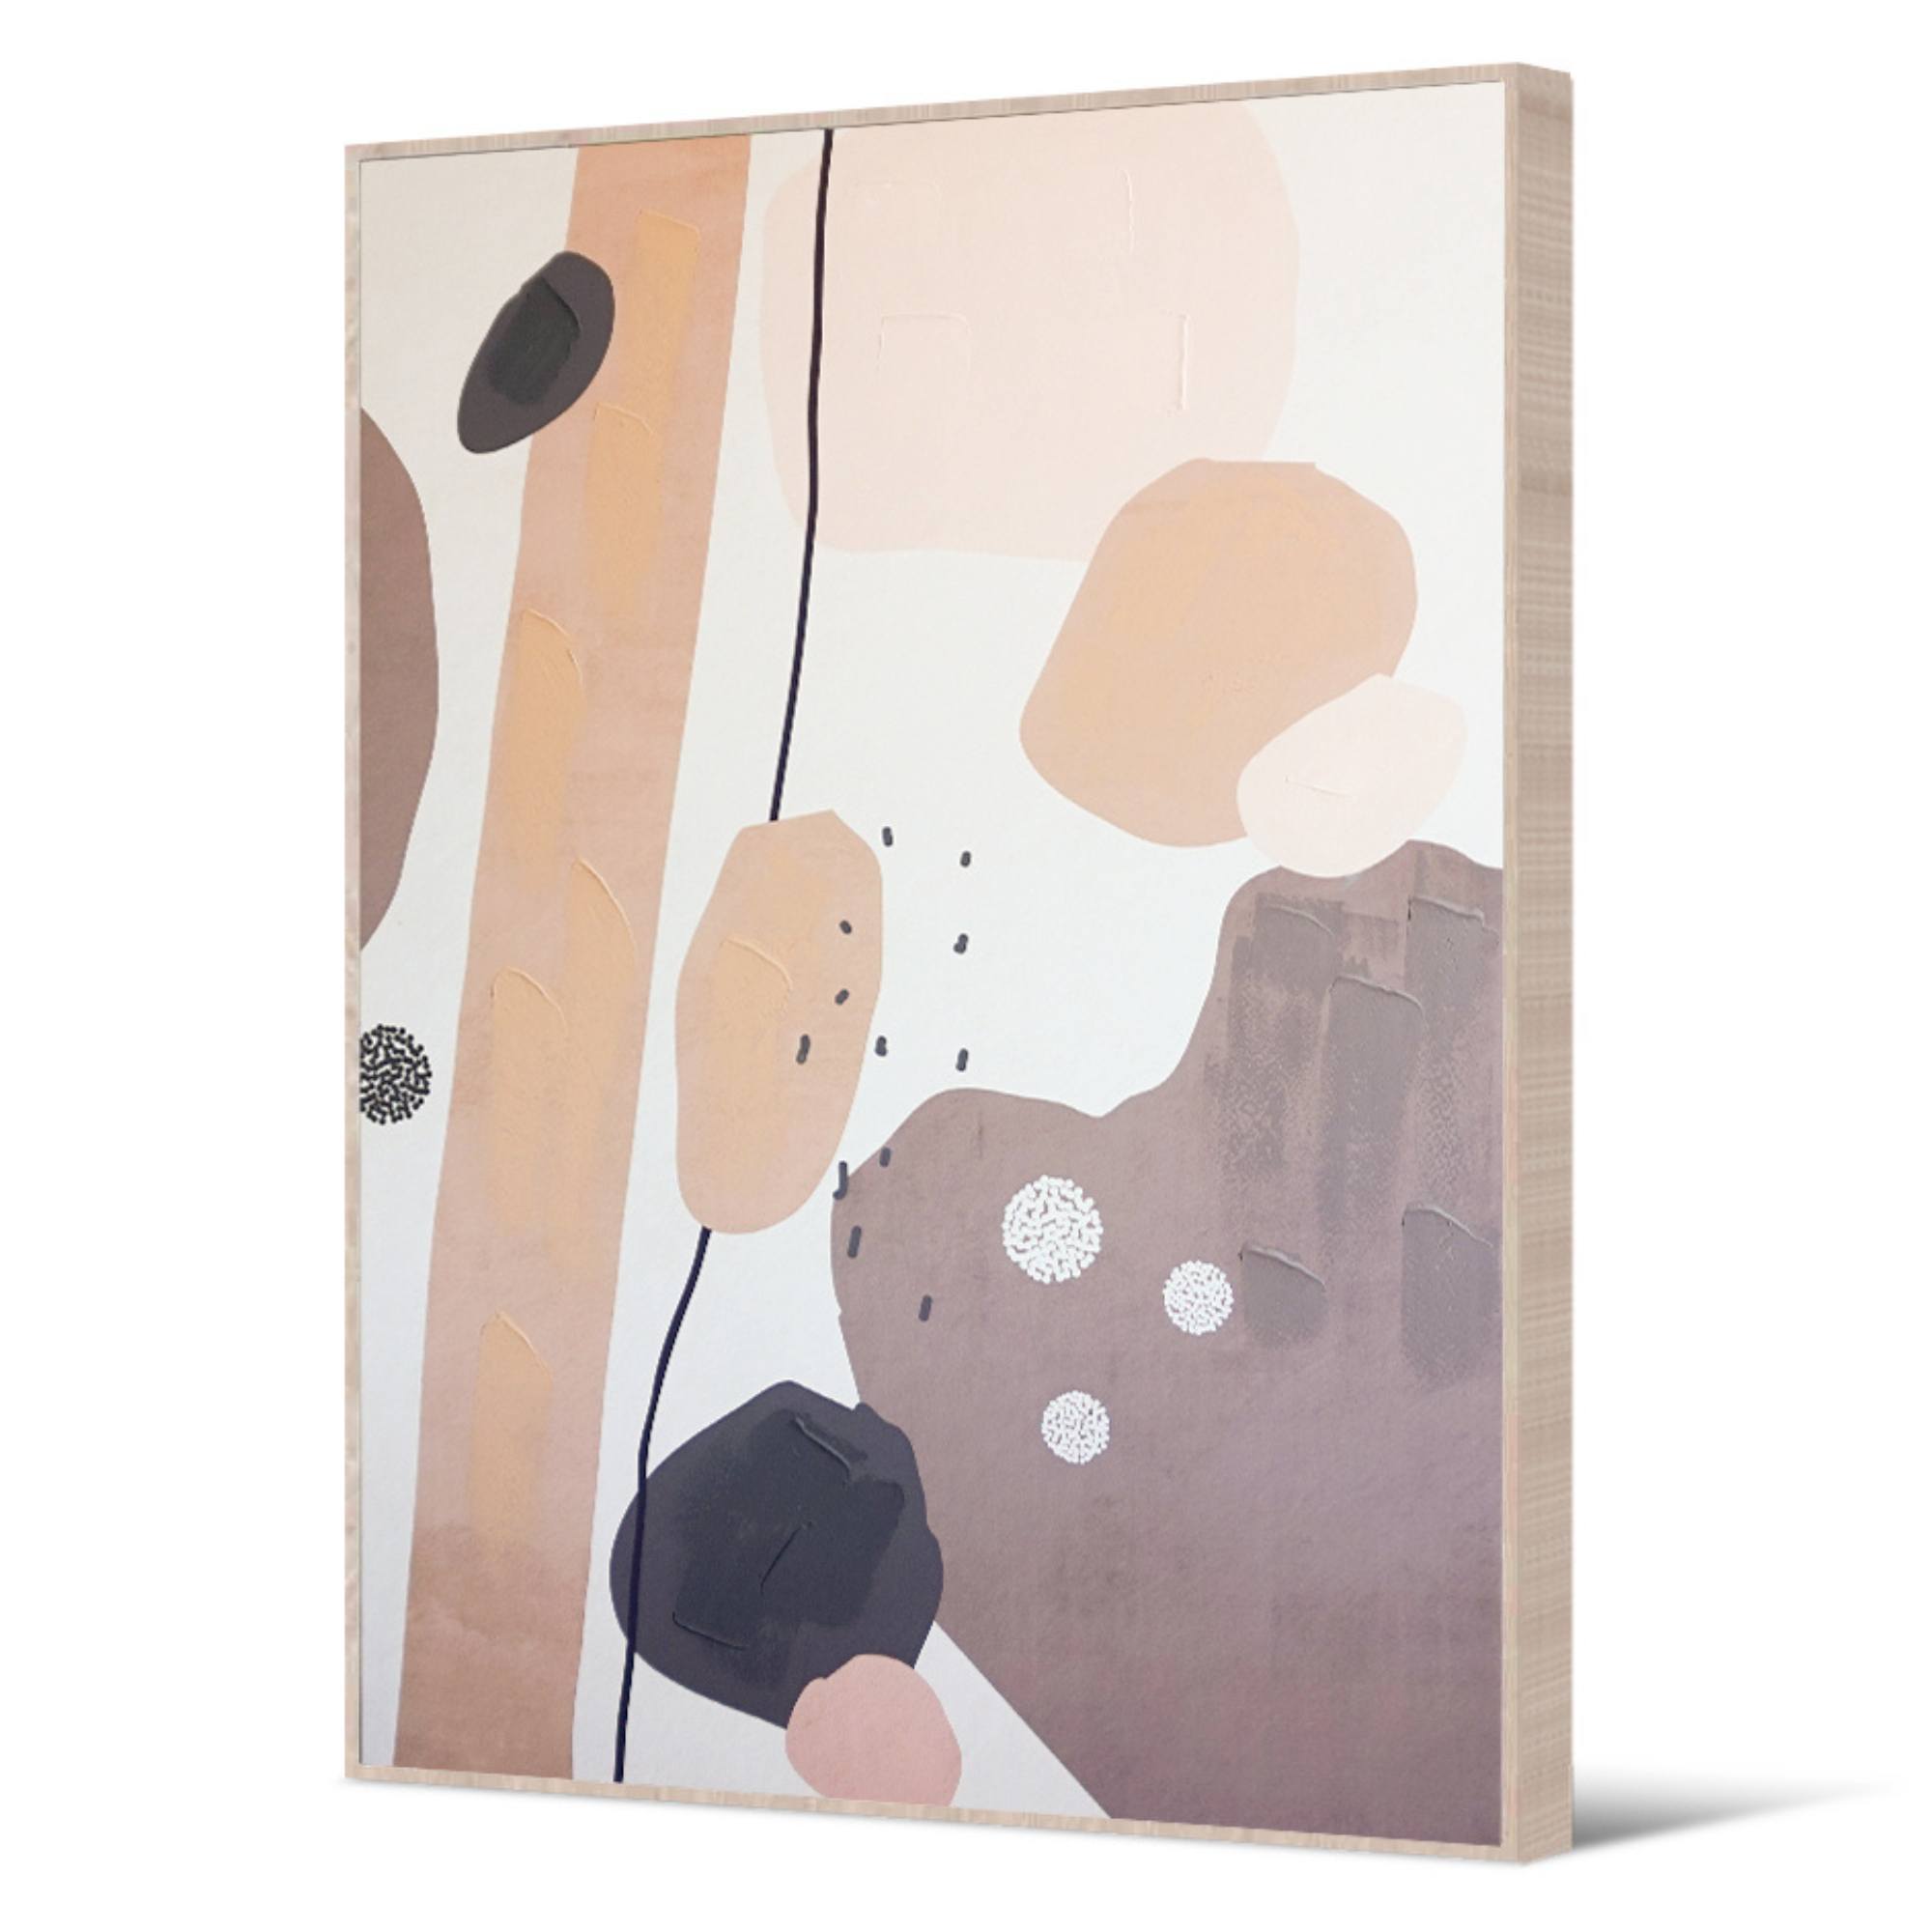 Hand-painted elements on canvas artwork with natural frame featuring serene neutral tones and textured oil embellishments for sophisticated decor